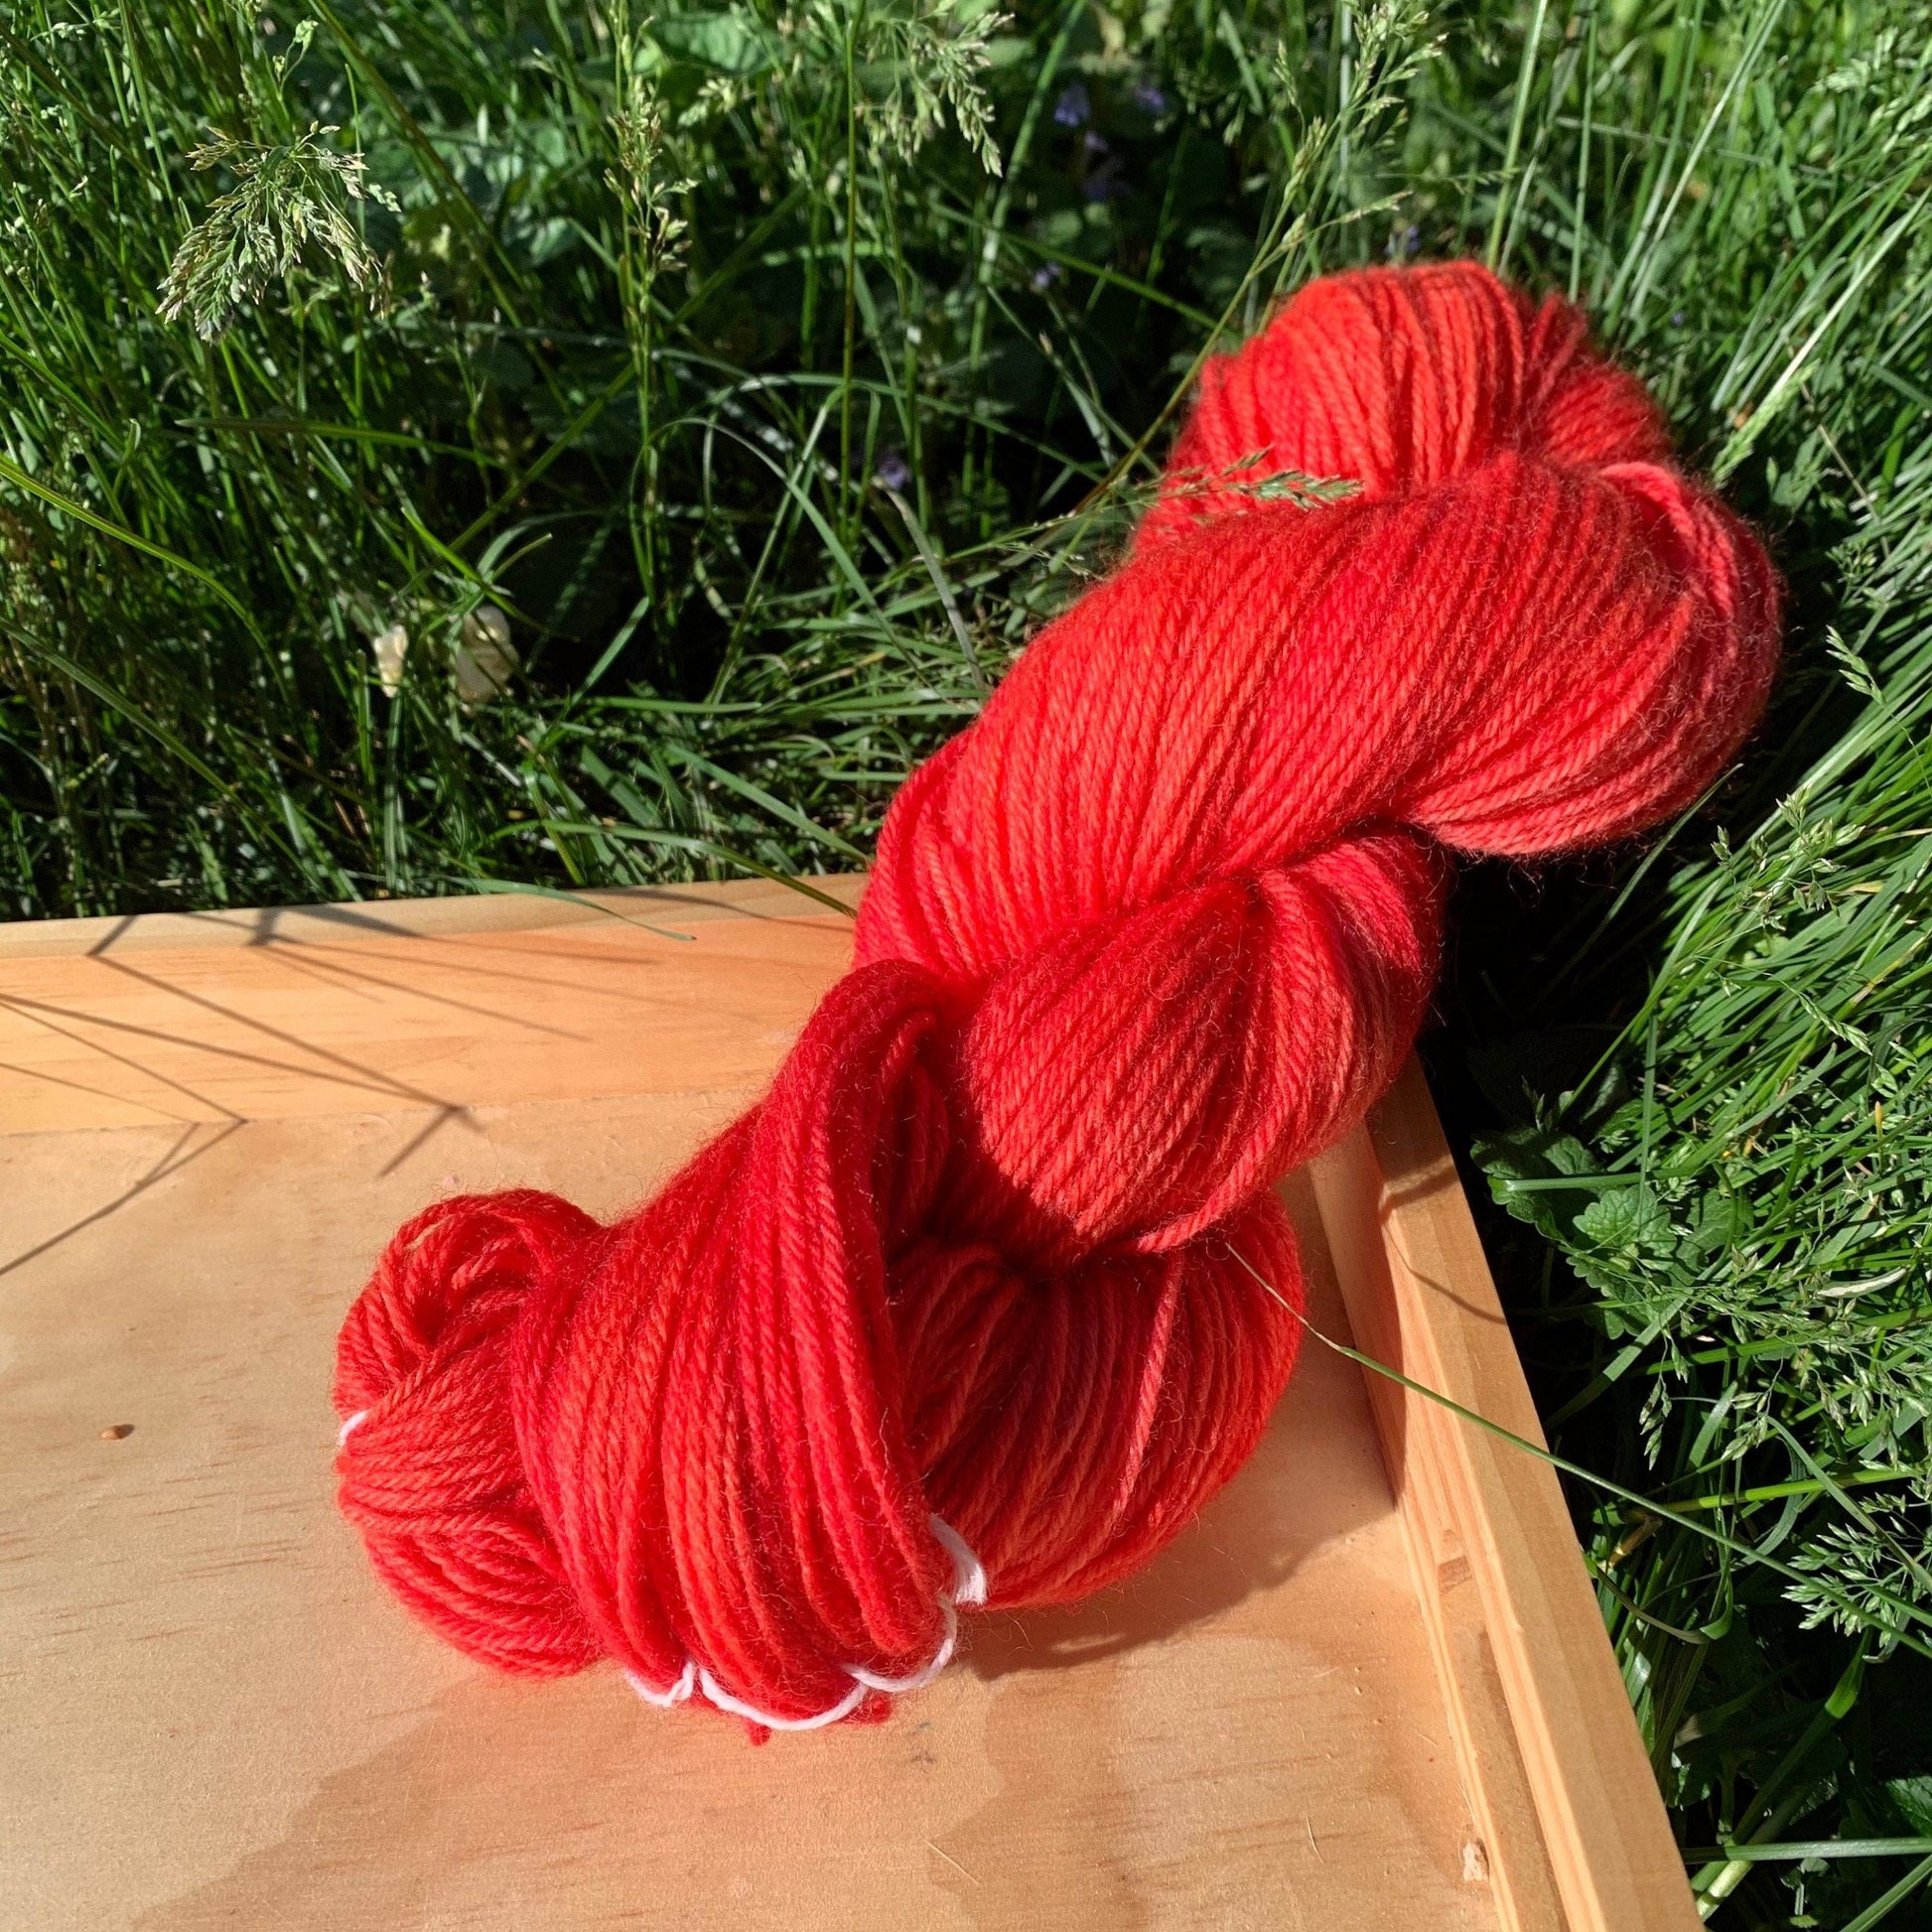 A supersaturated skein of red hand-dyed yarn.